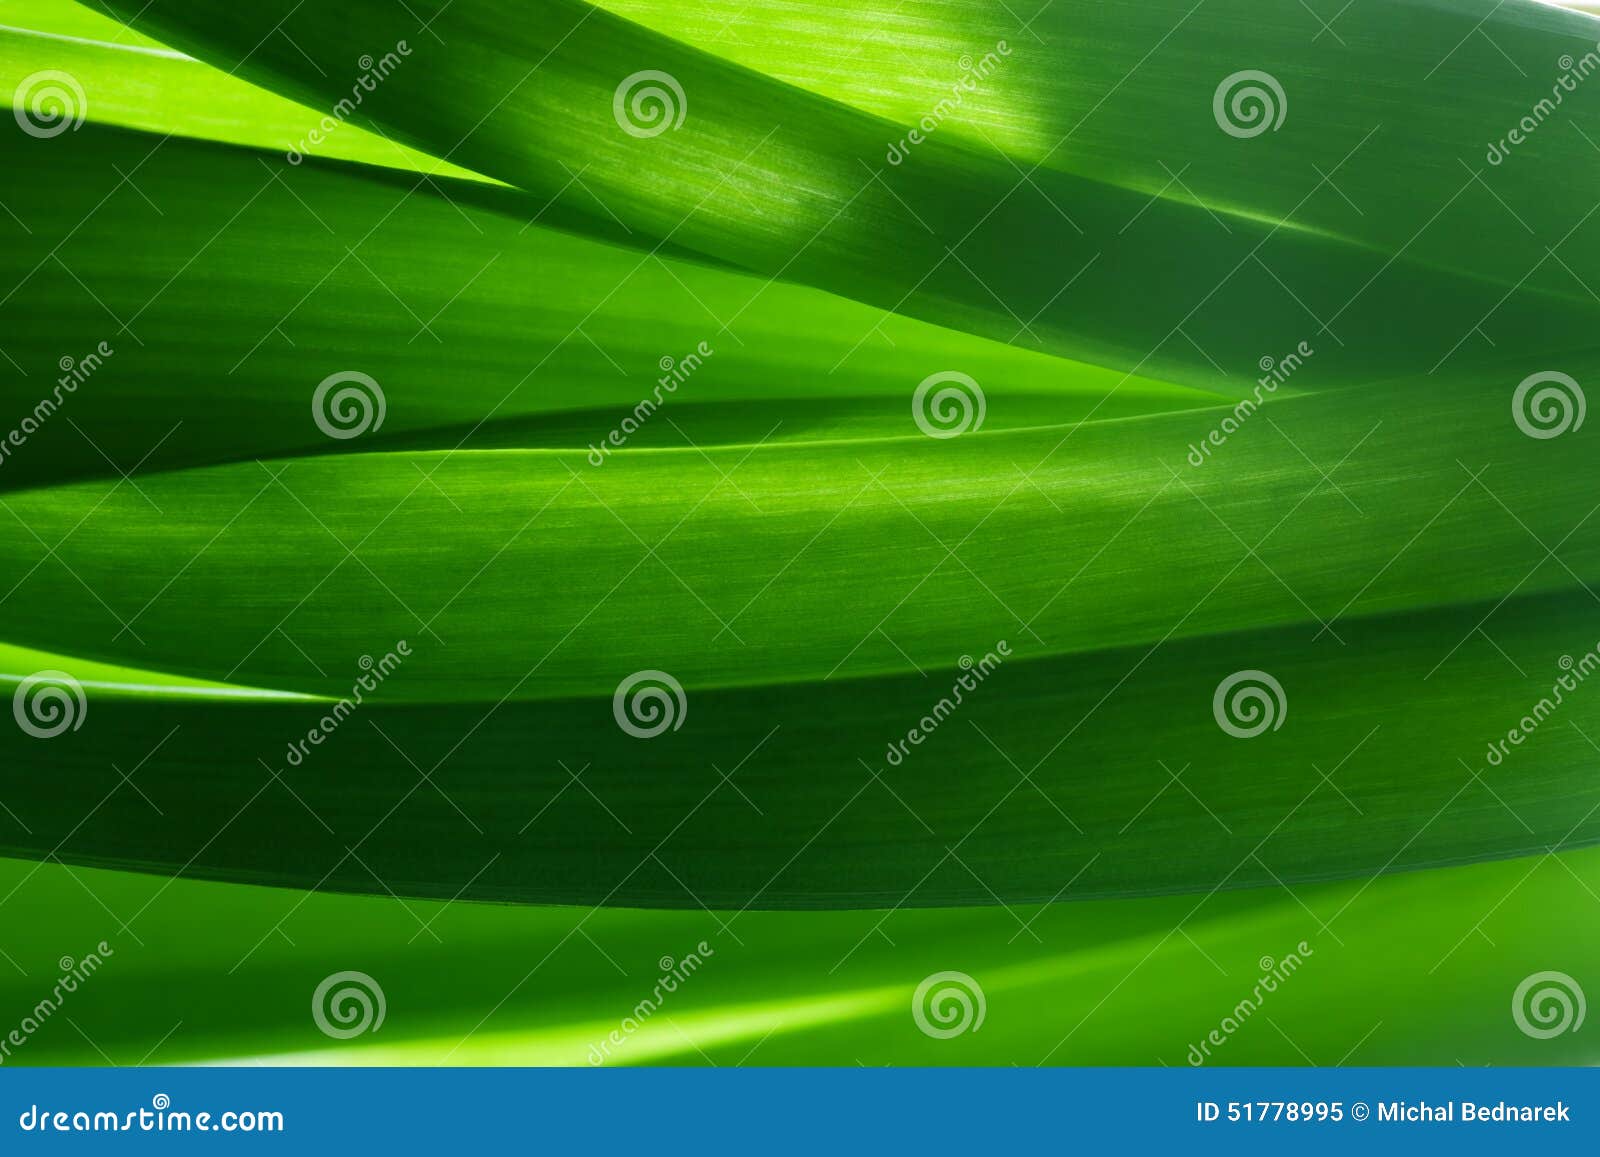 green grass, plants background in backlight.